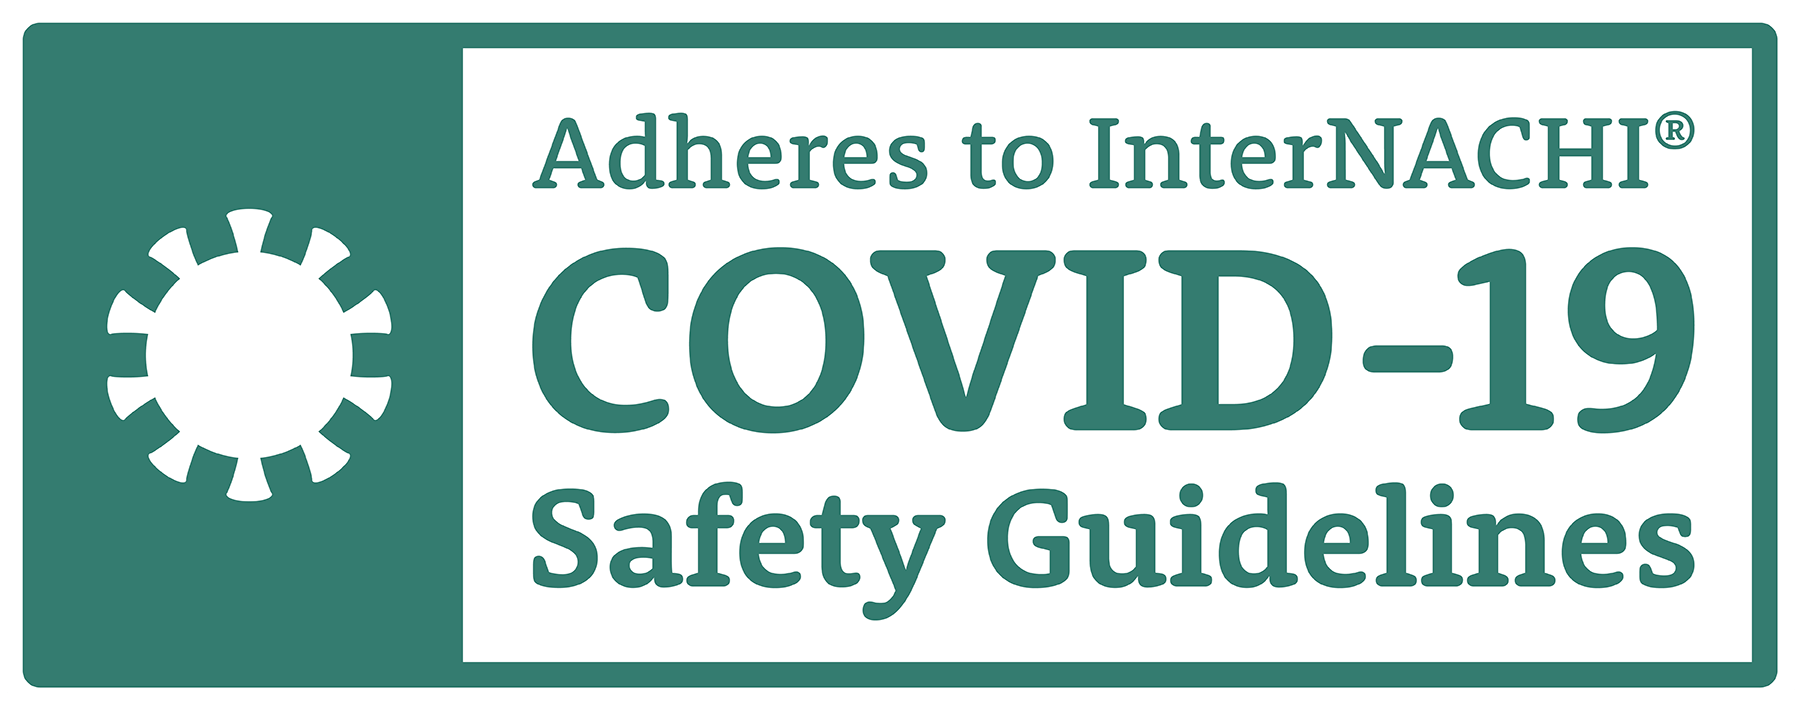 Adheres to InterNachi COVID Safety Guidelines Charlottetown, PEI